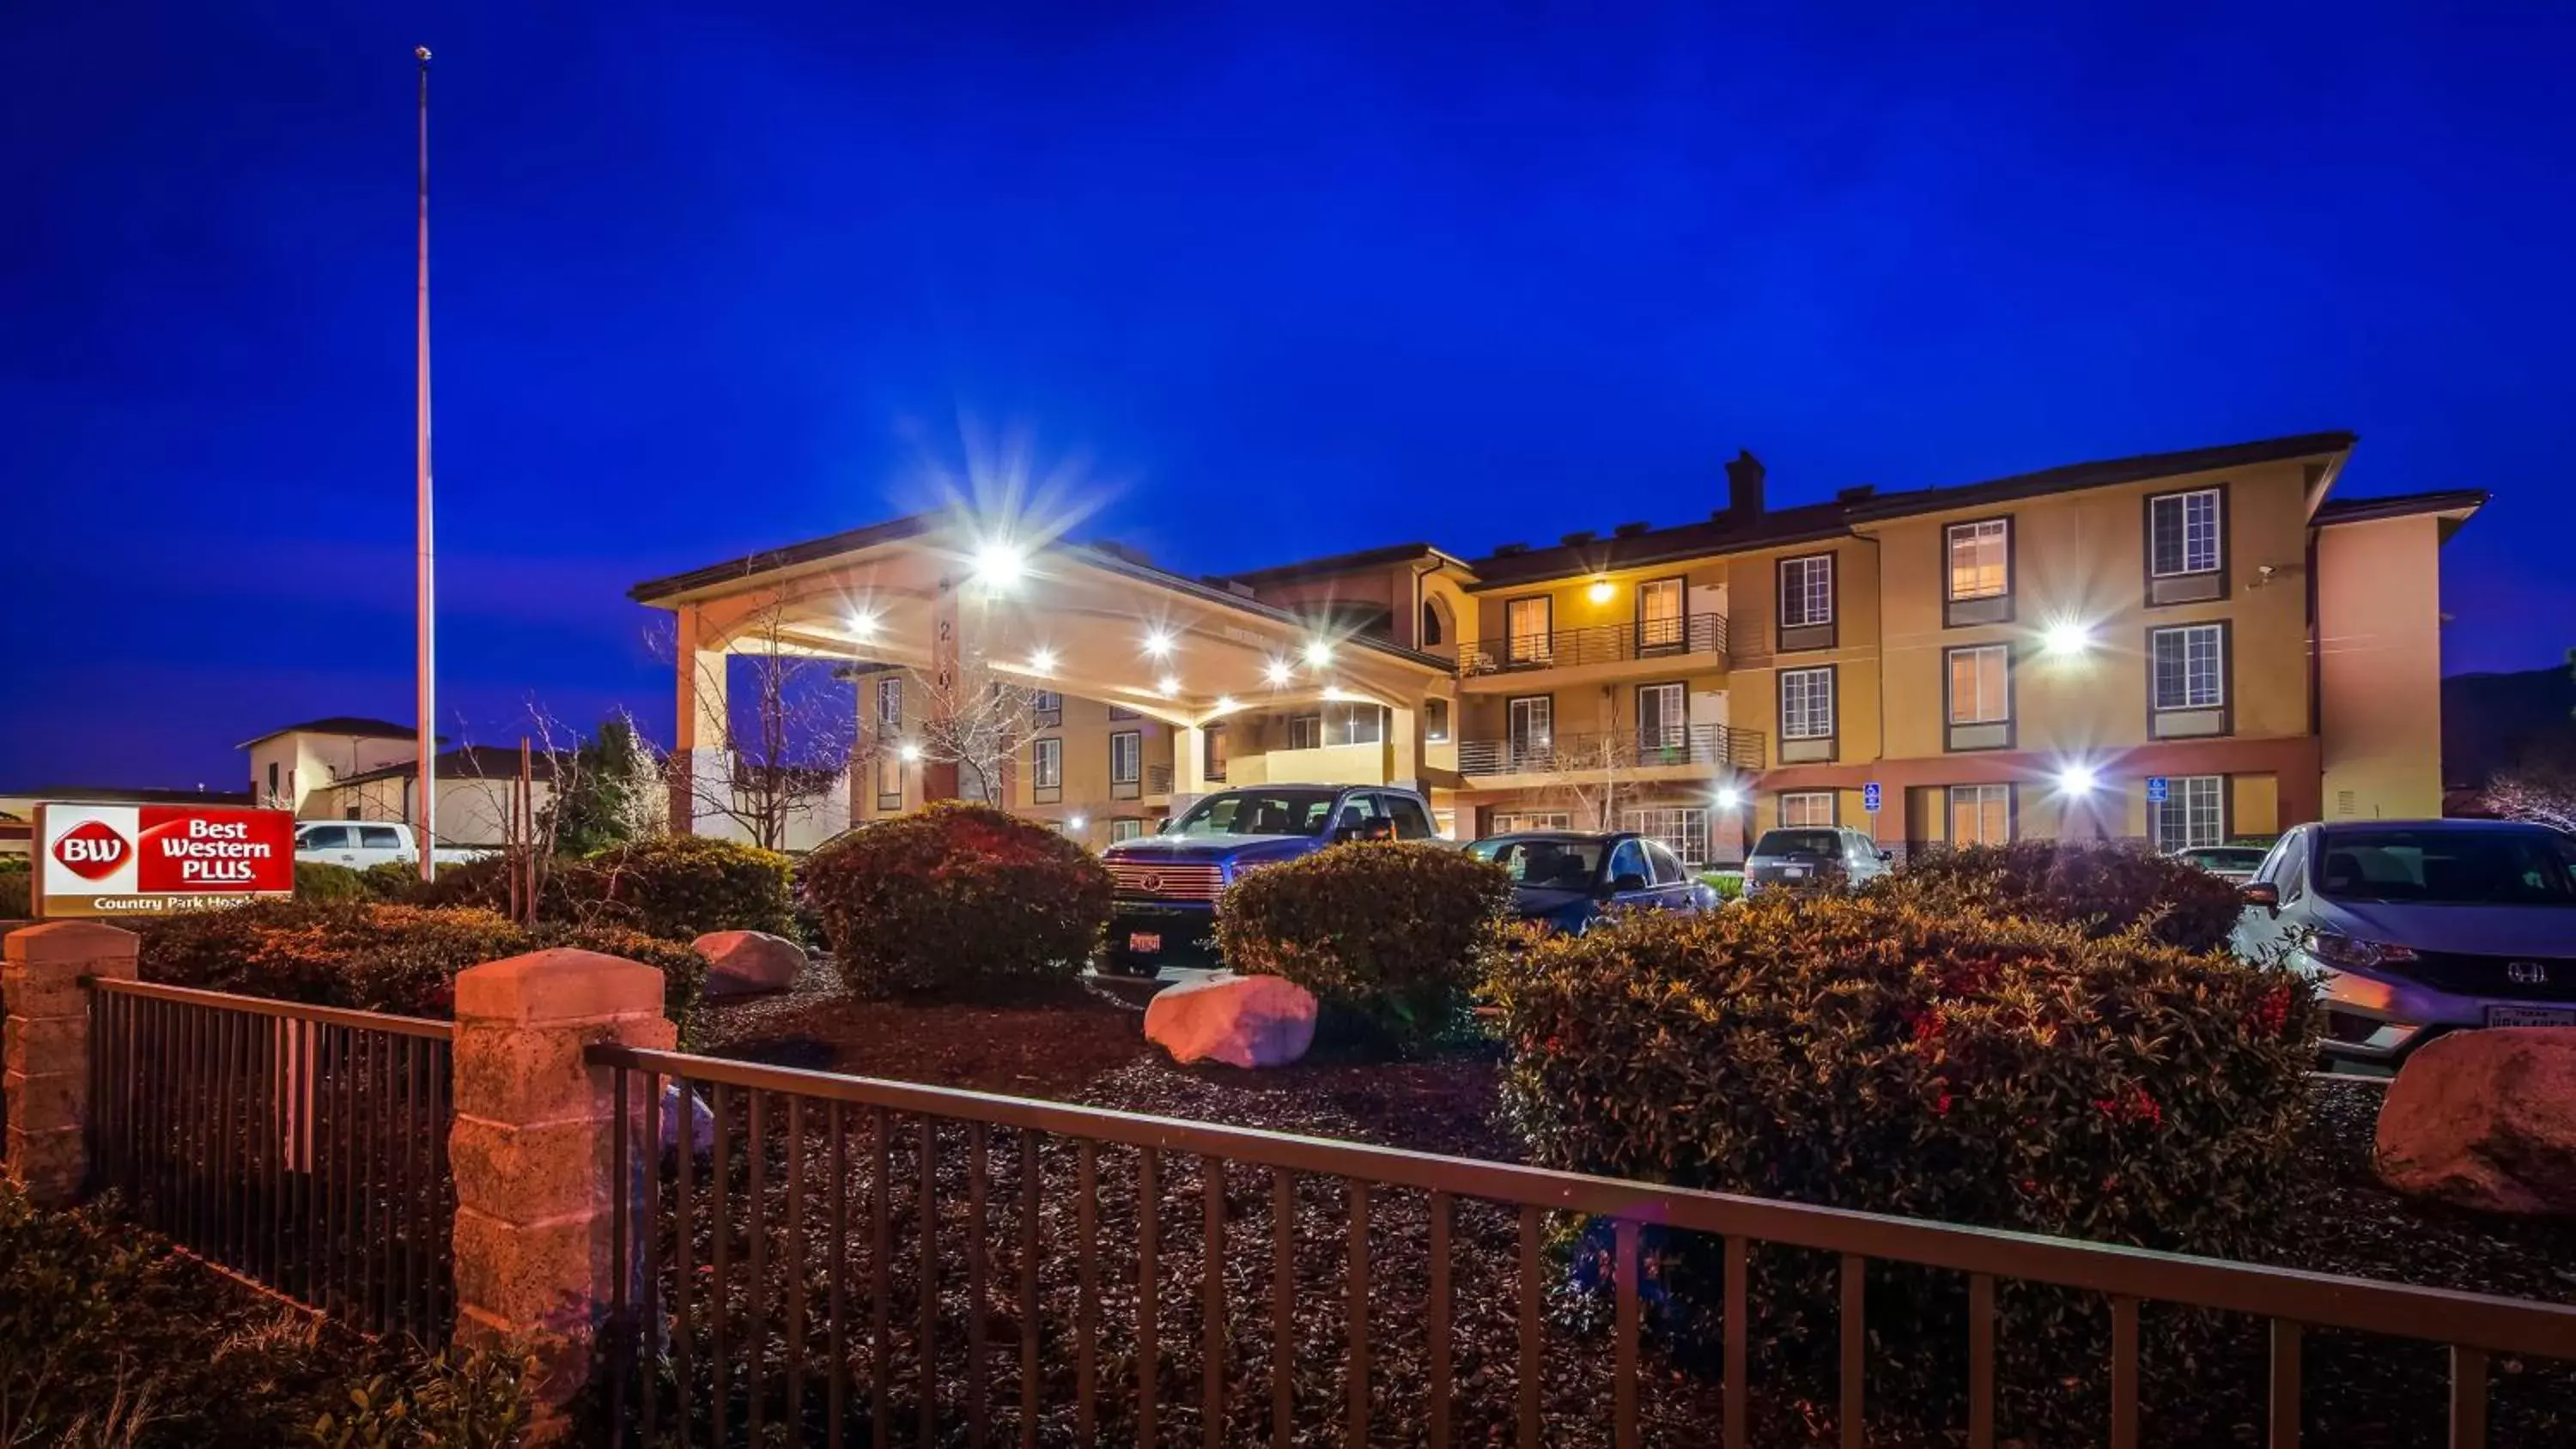 Property building in Best Western Plus Country Park Hotel